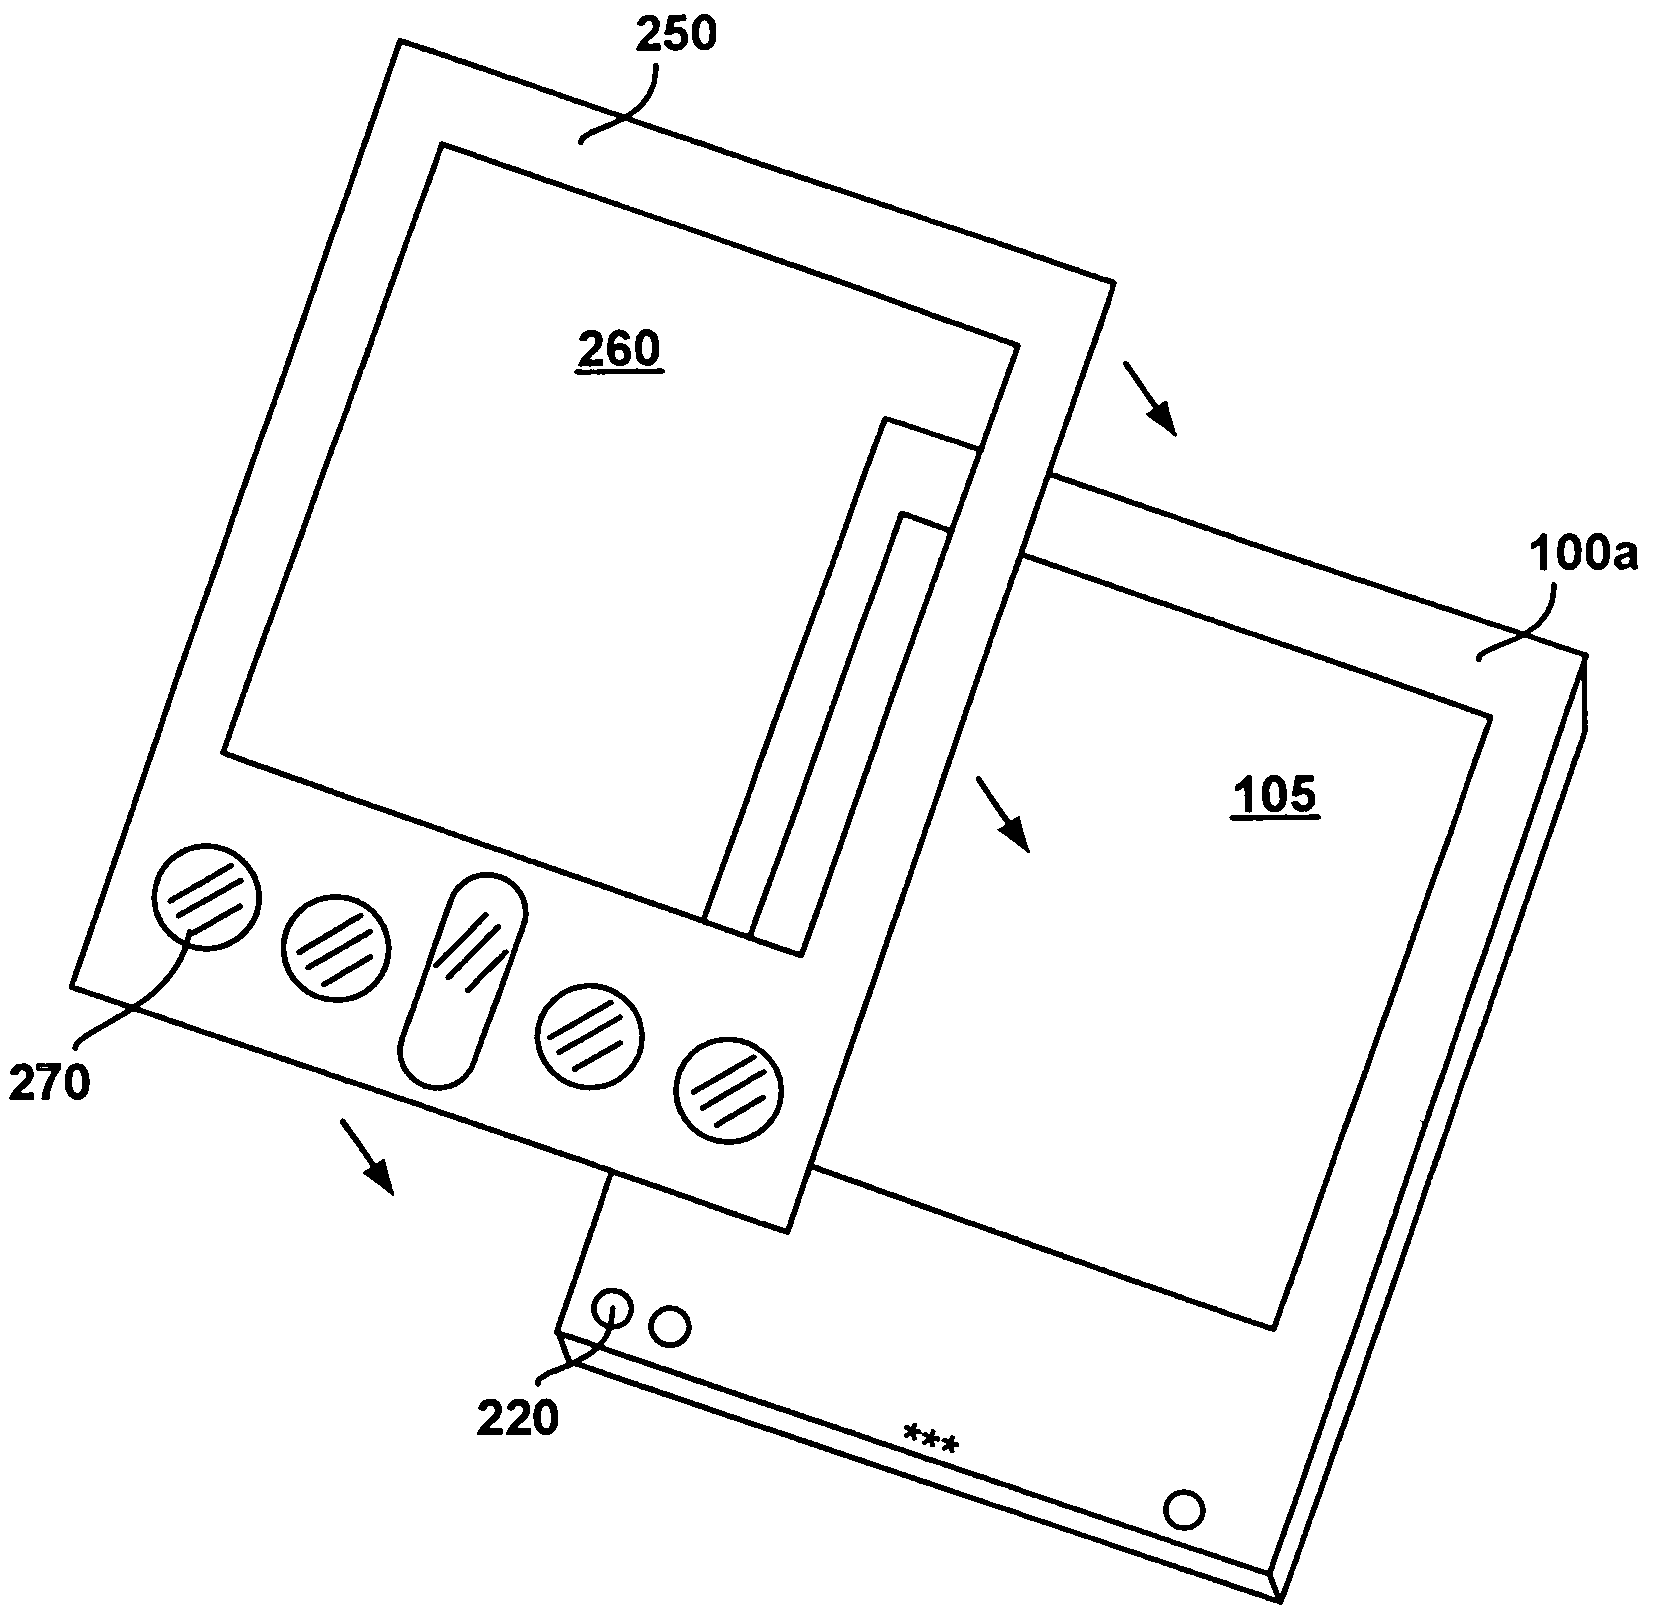 Integrated removable functional faceplate for portable computer system